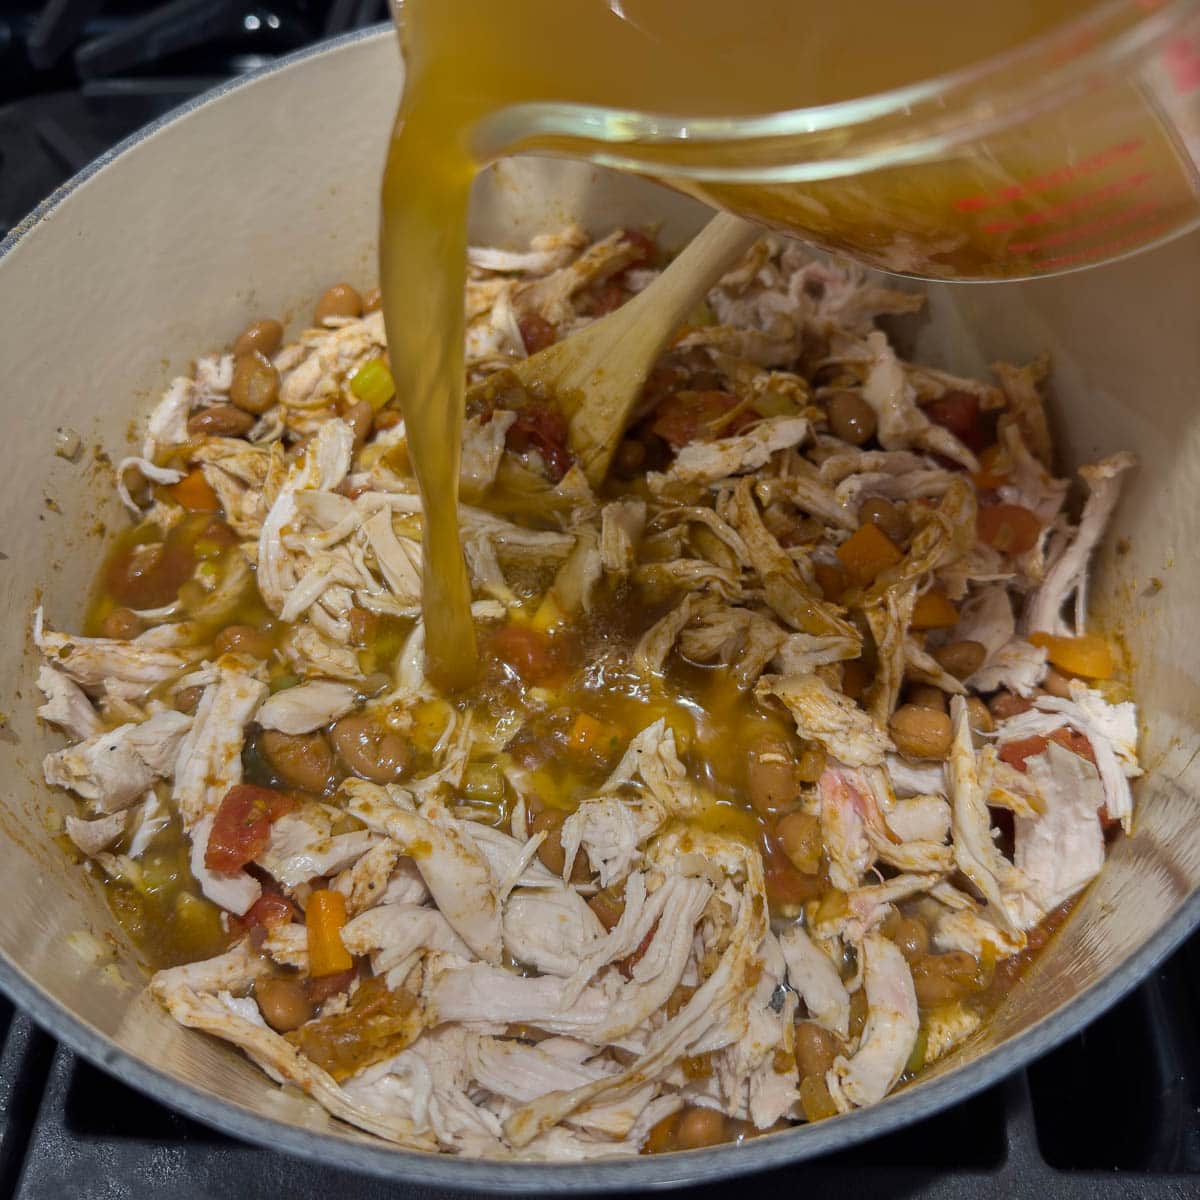 Adding shredded chicken and broth to the pot to complete the soup.